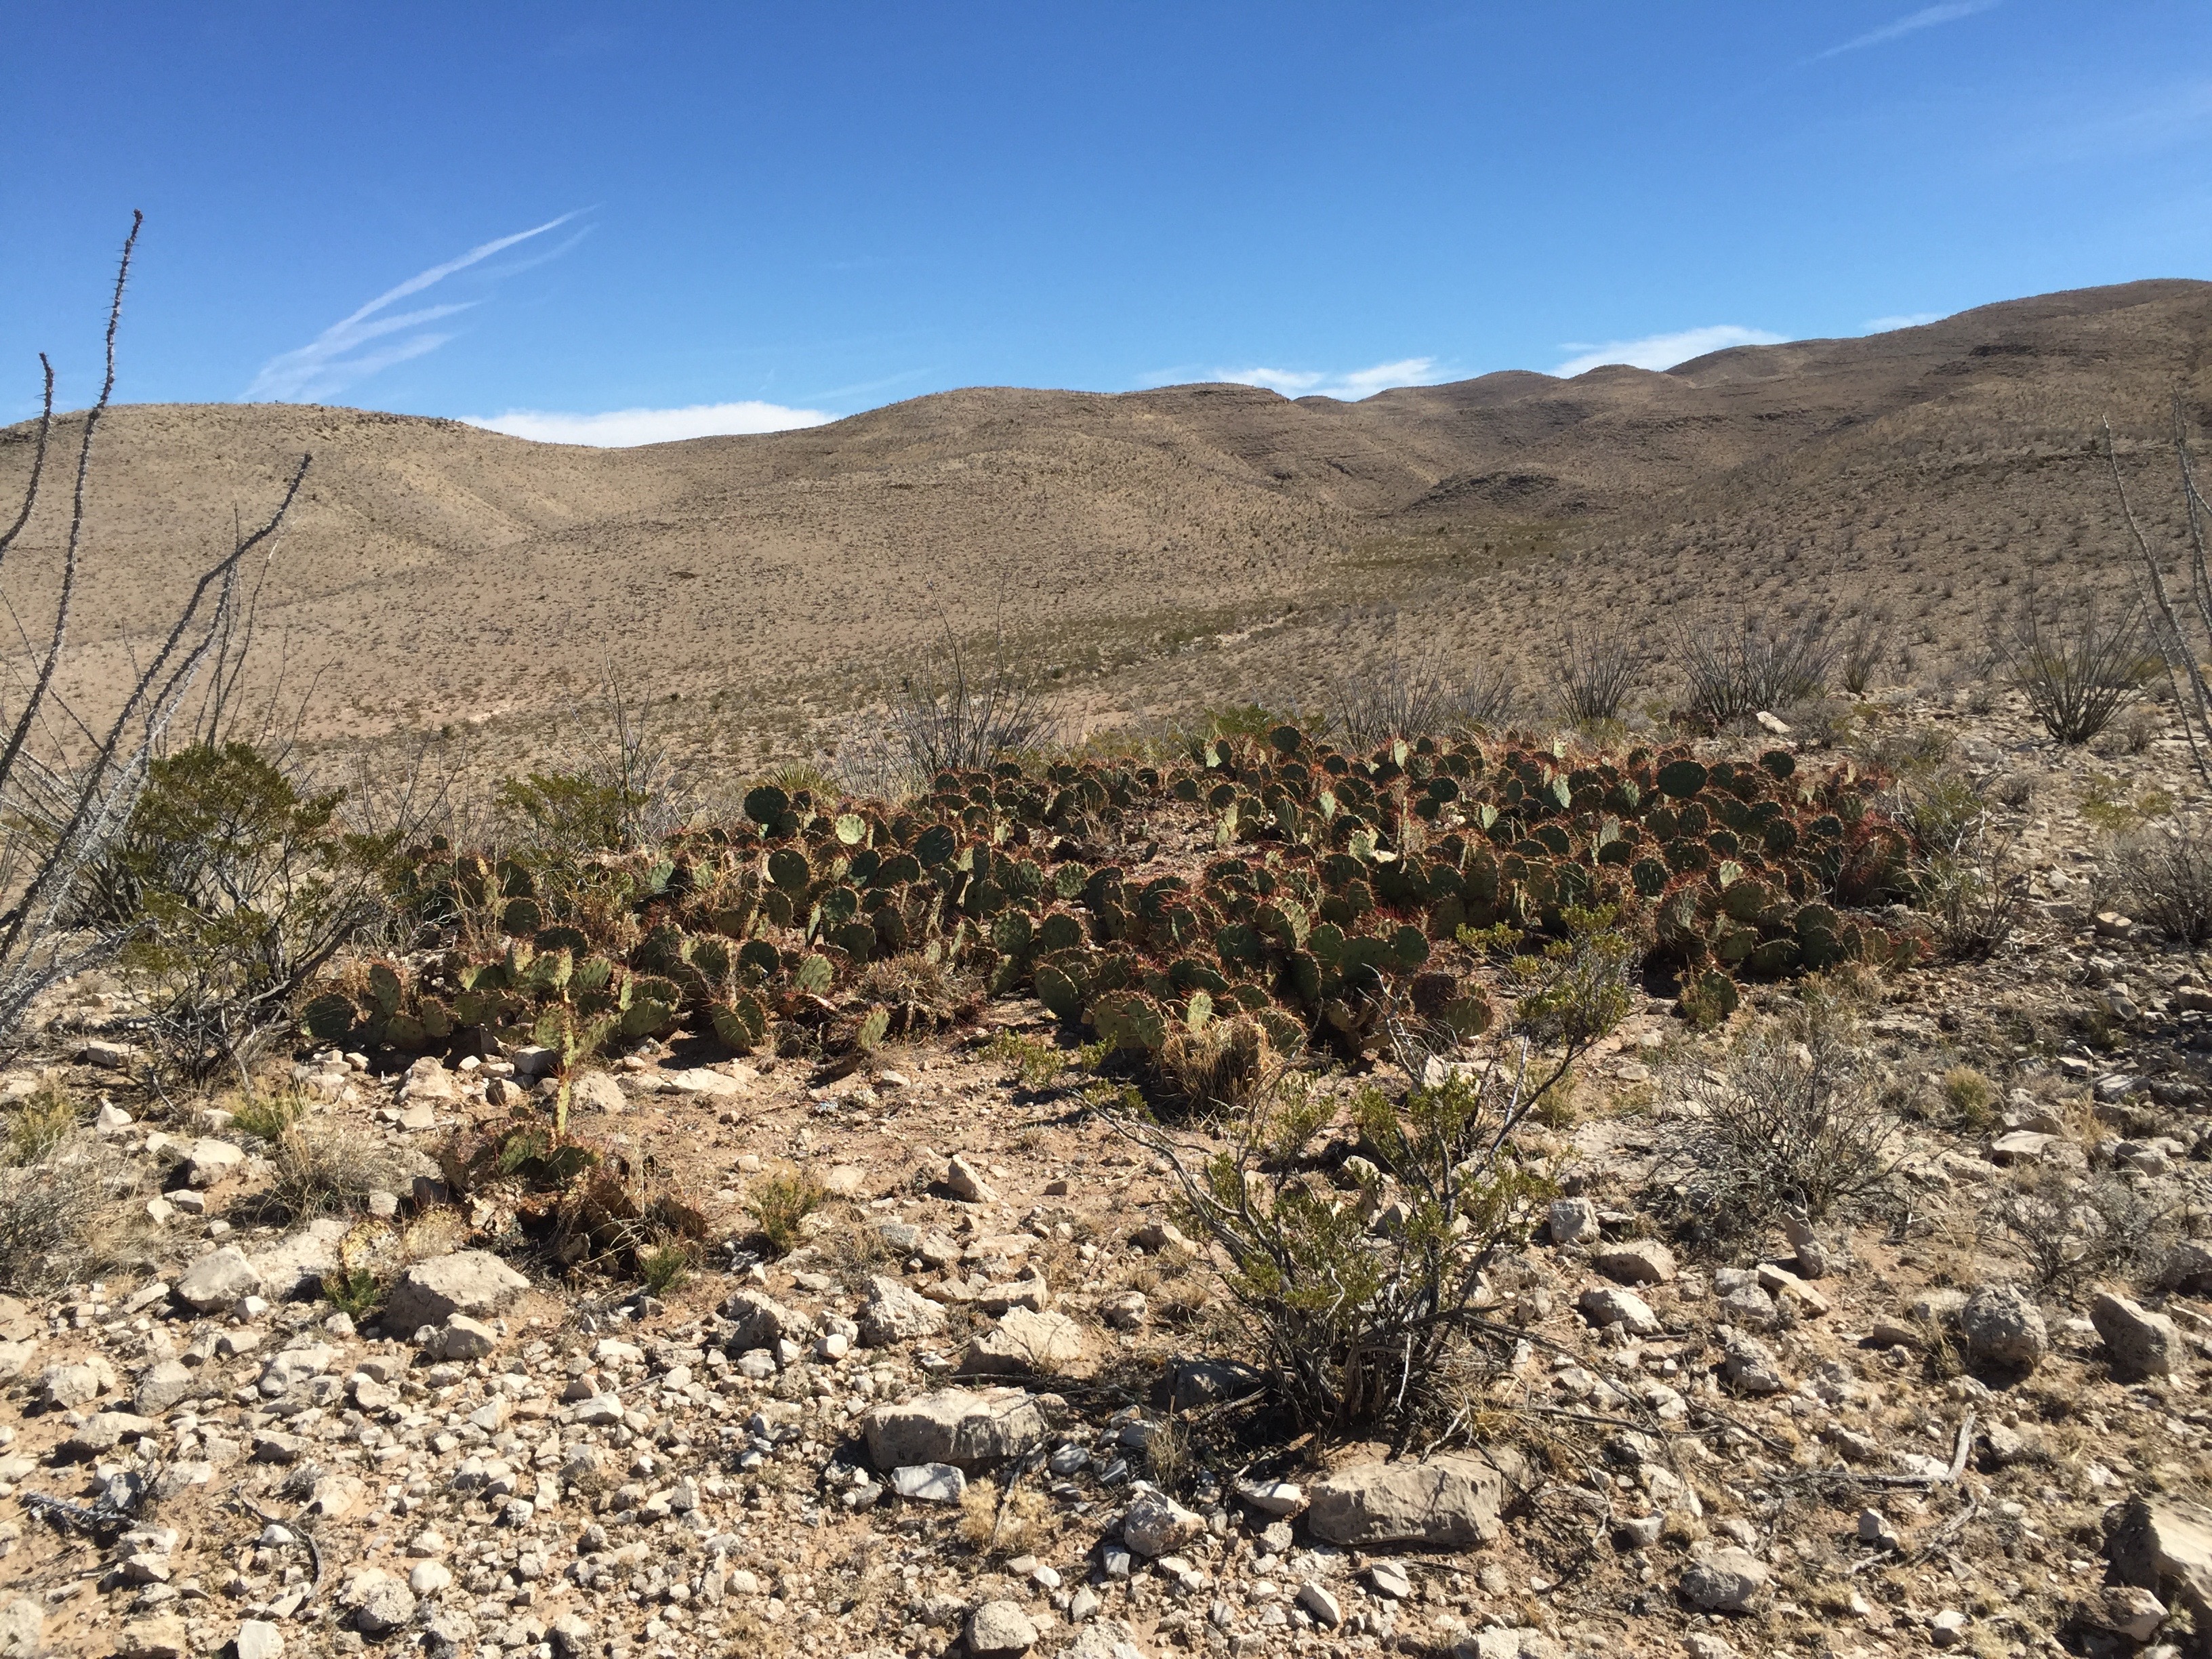 A "stand" of prickly pears in an otherwise fairly barren landscape